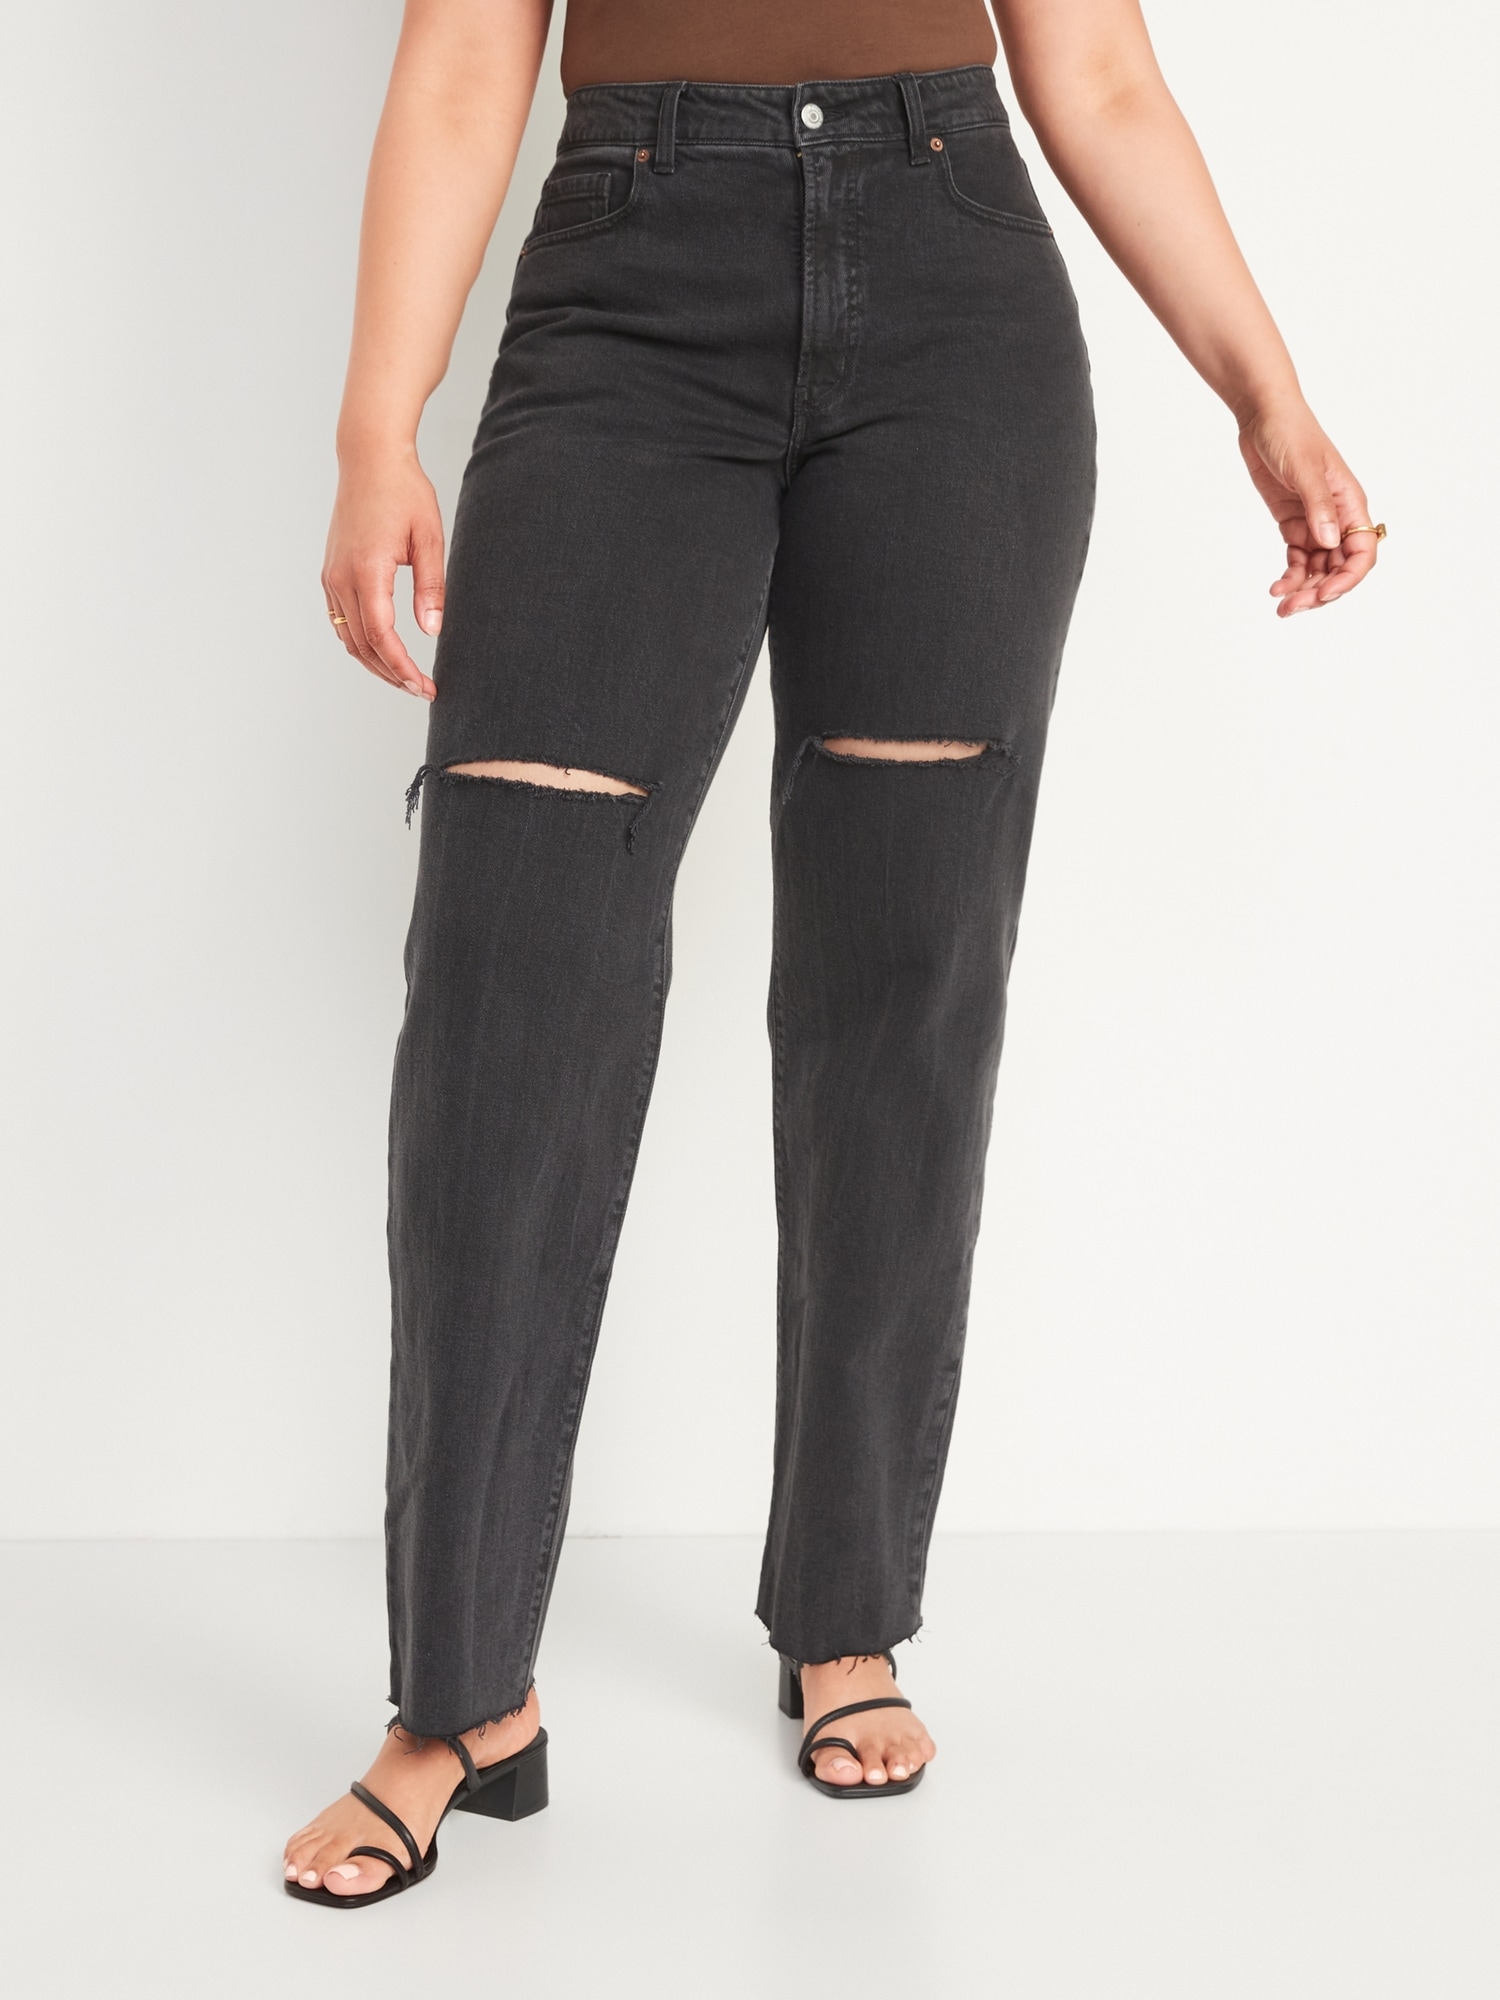 High-Waisted OG Loose Black Ripped Cut-Off Jeans for Women